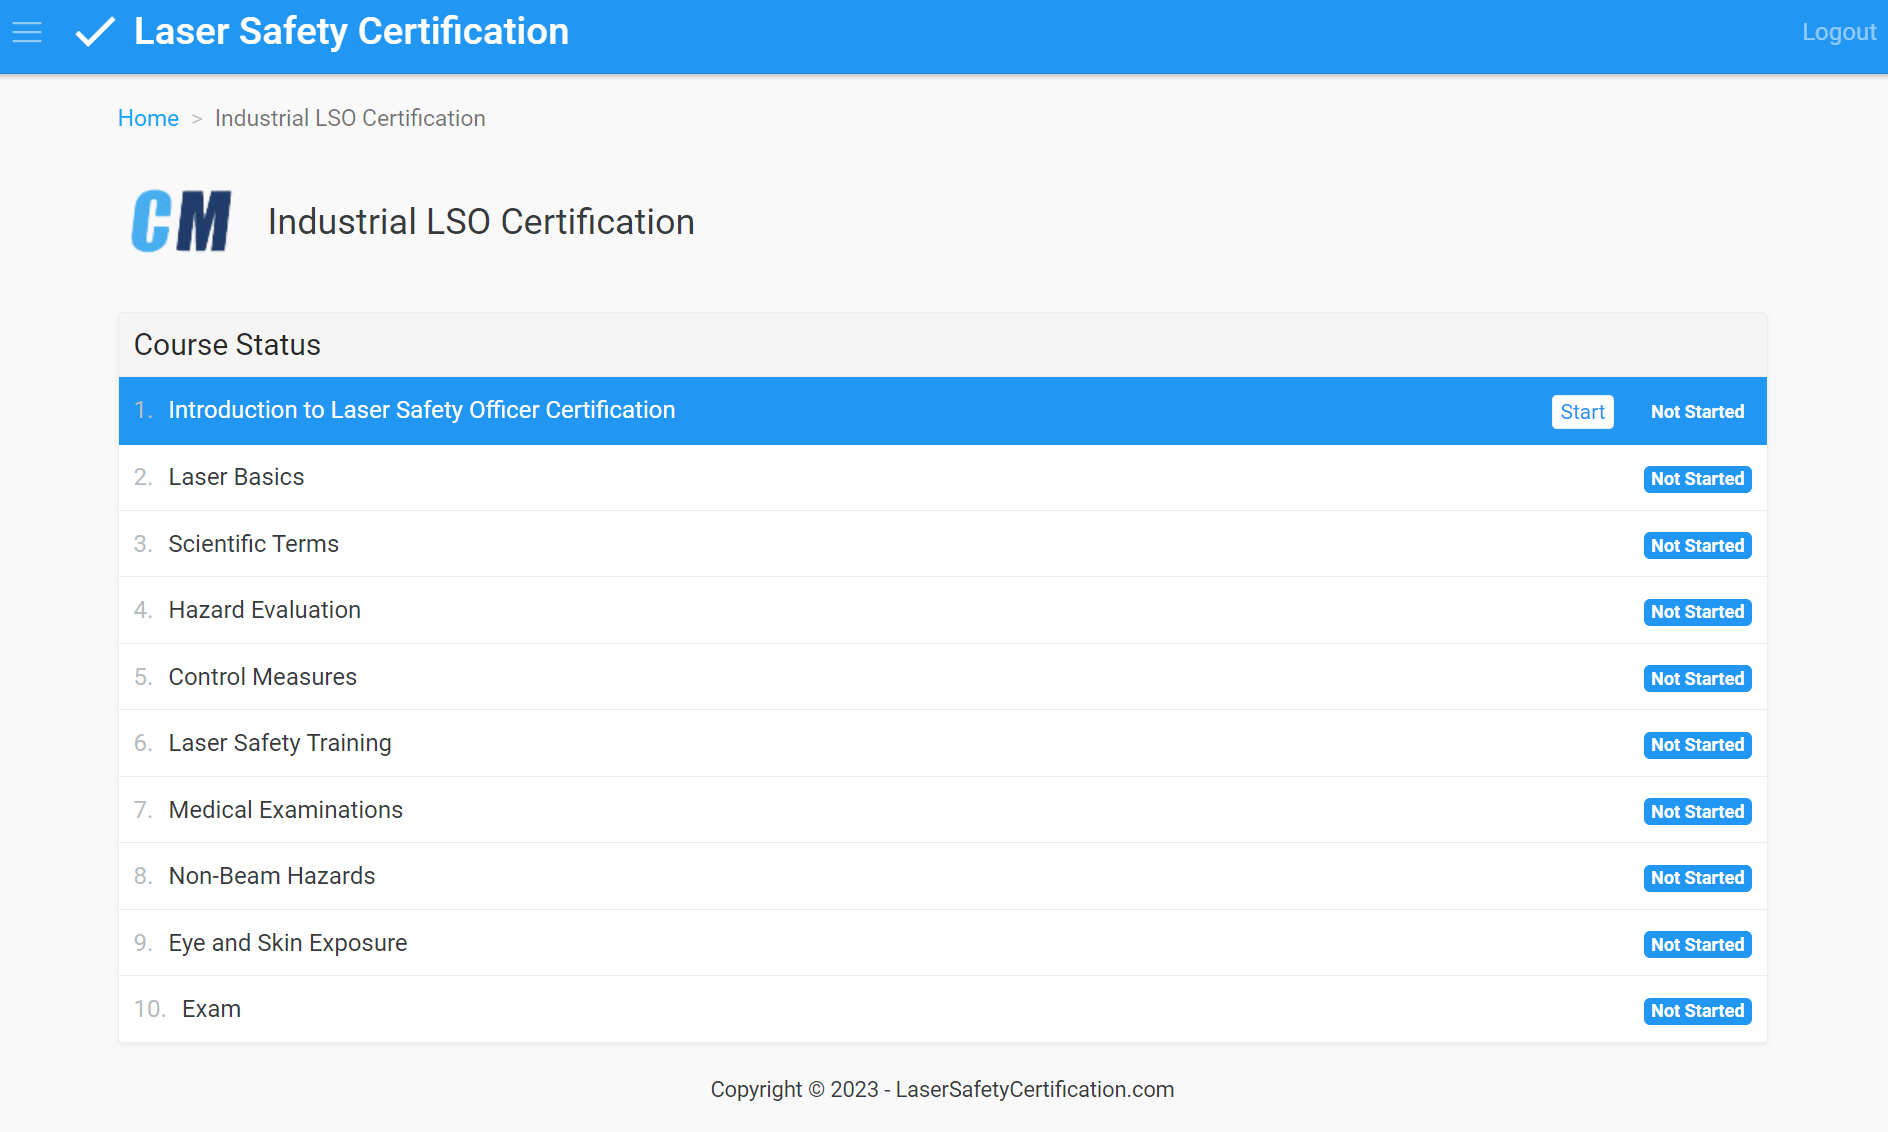 A screen shot of the laser safety certification.